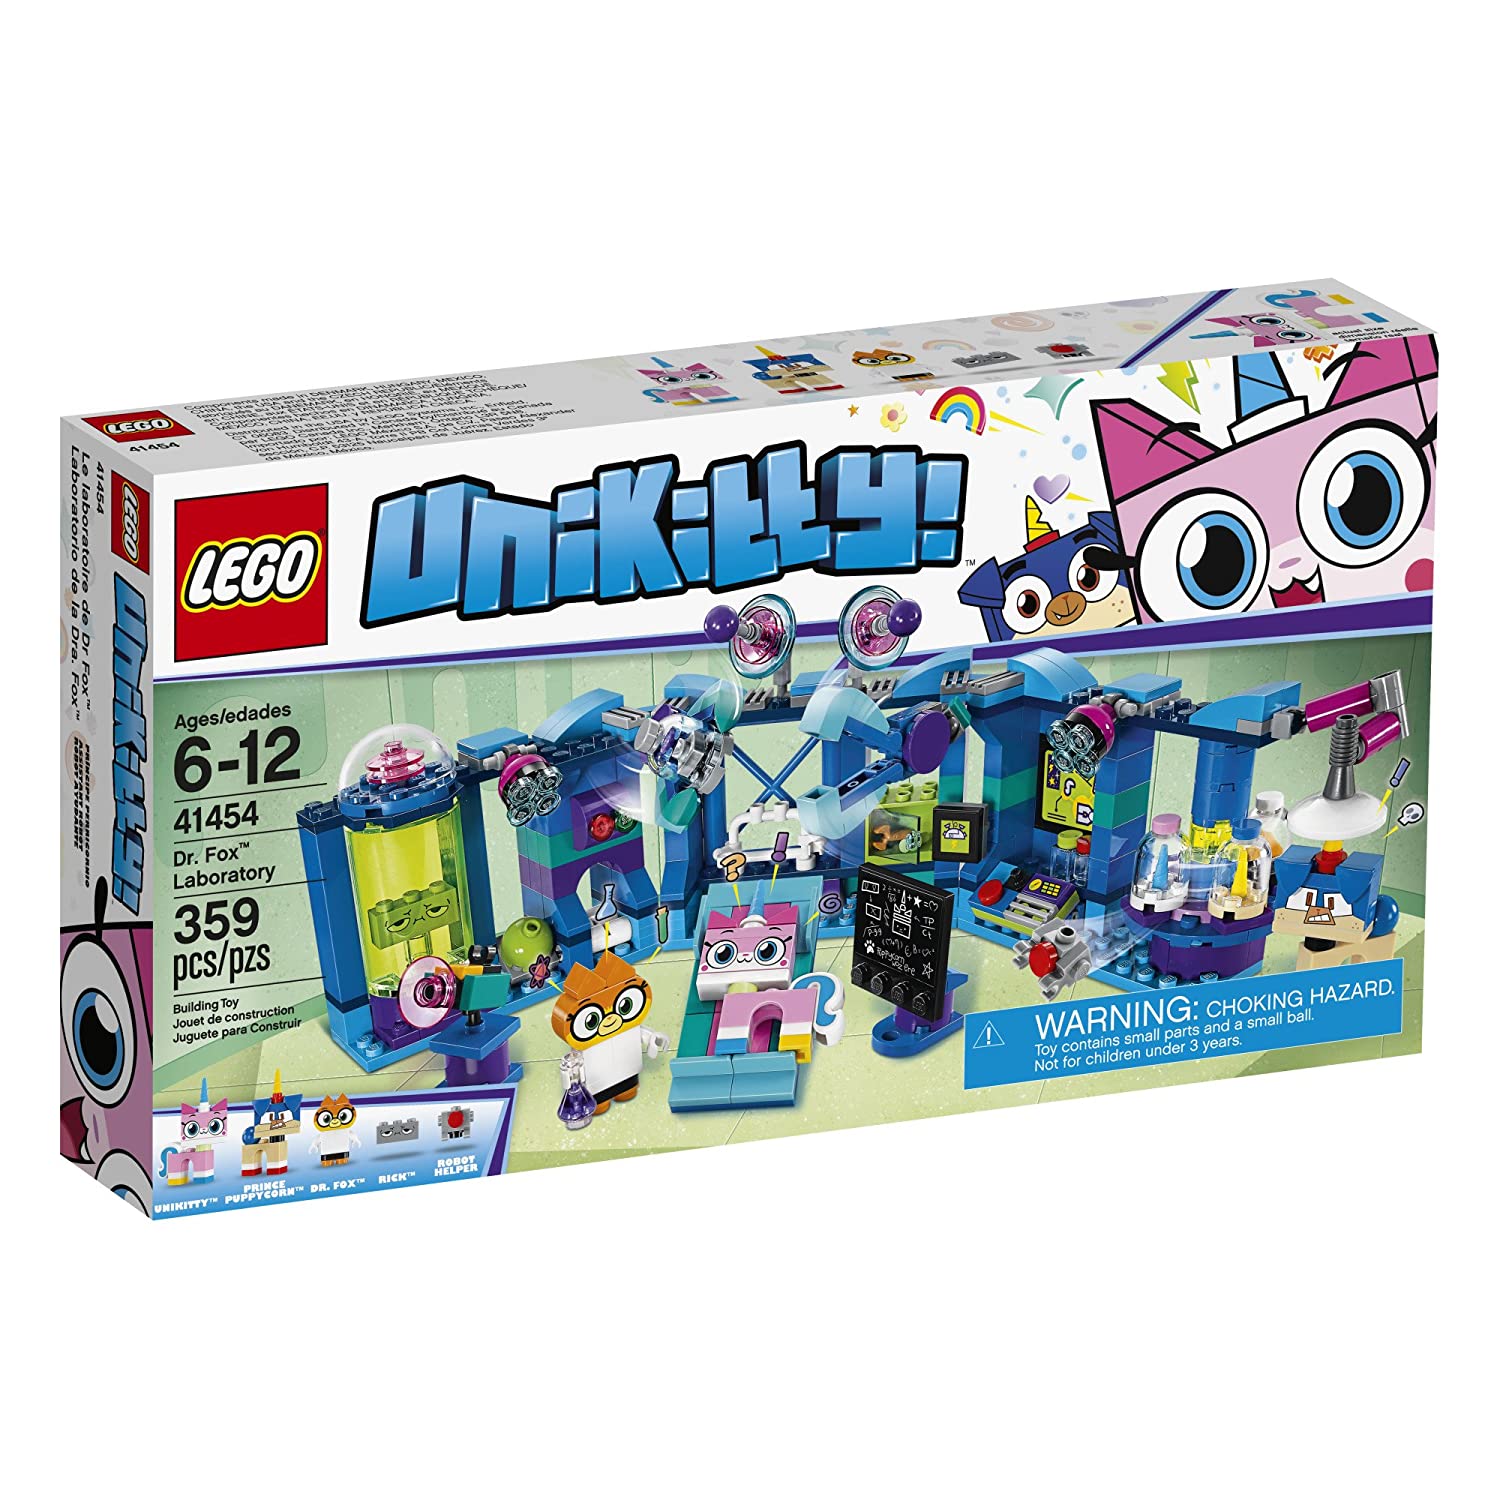 Top 7 Best LEGO Unikitty Sets Reviews in 2022 2